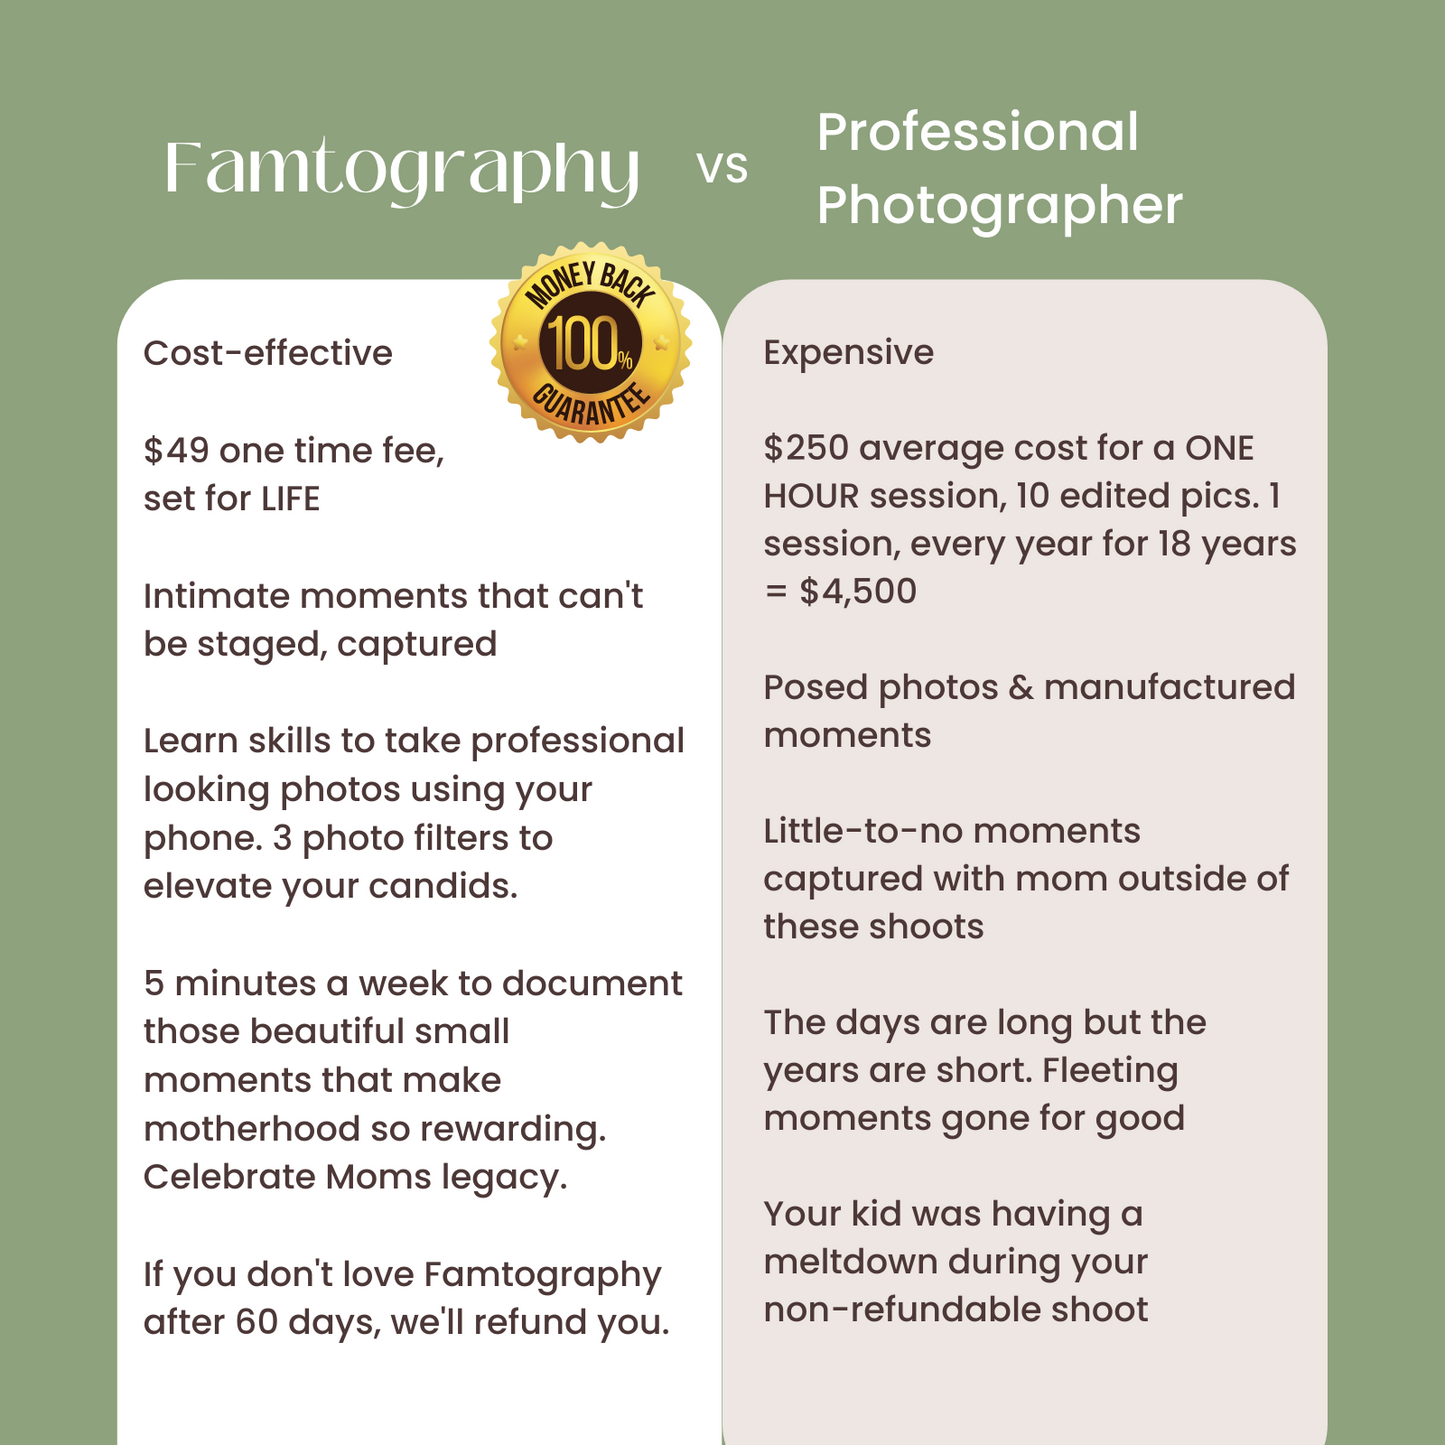 52 Famtography Prompts & Mobile Photo Guide Bundle (for up to 2 devices)